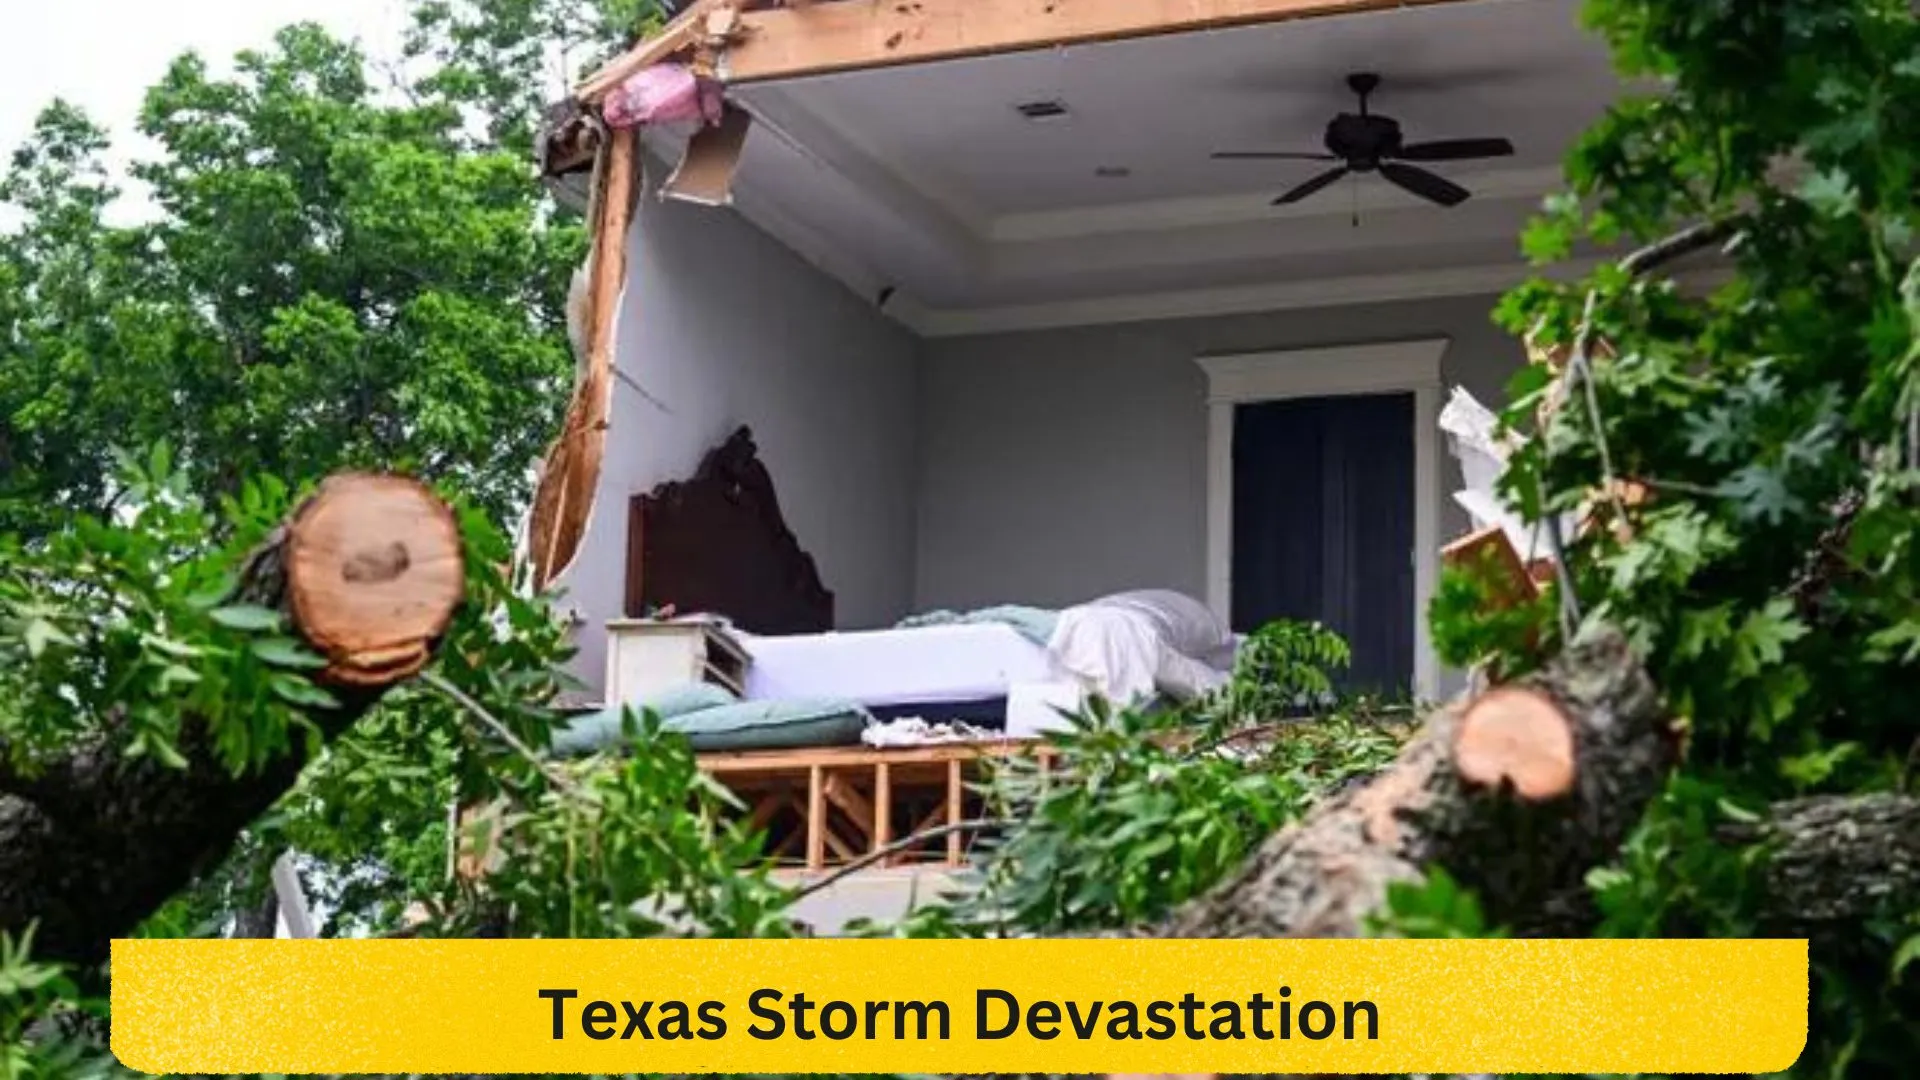 Texas Storm Devastation: Houston Faces Prolonged Power Outages, Sweltering Heat, and Billion-Dollar Damage